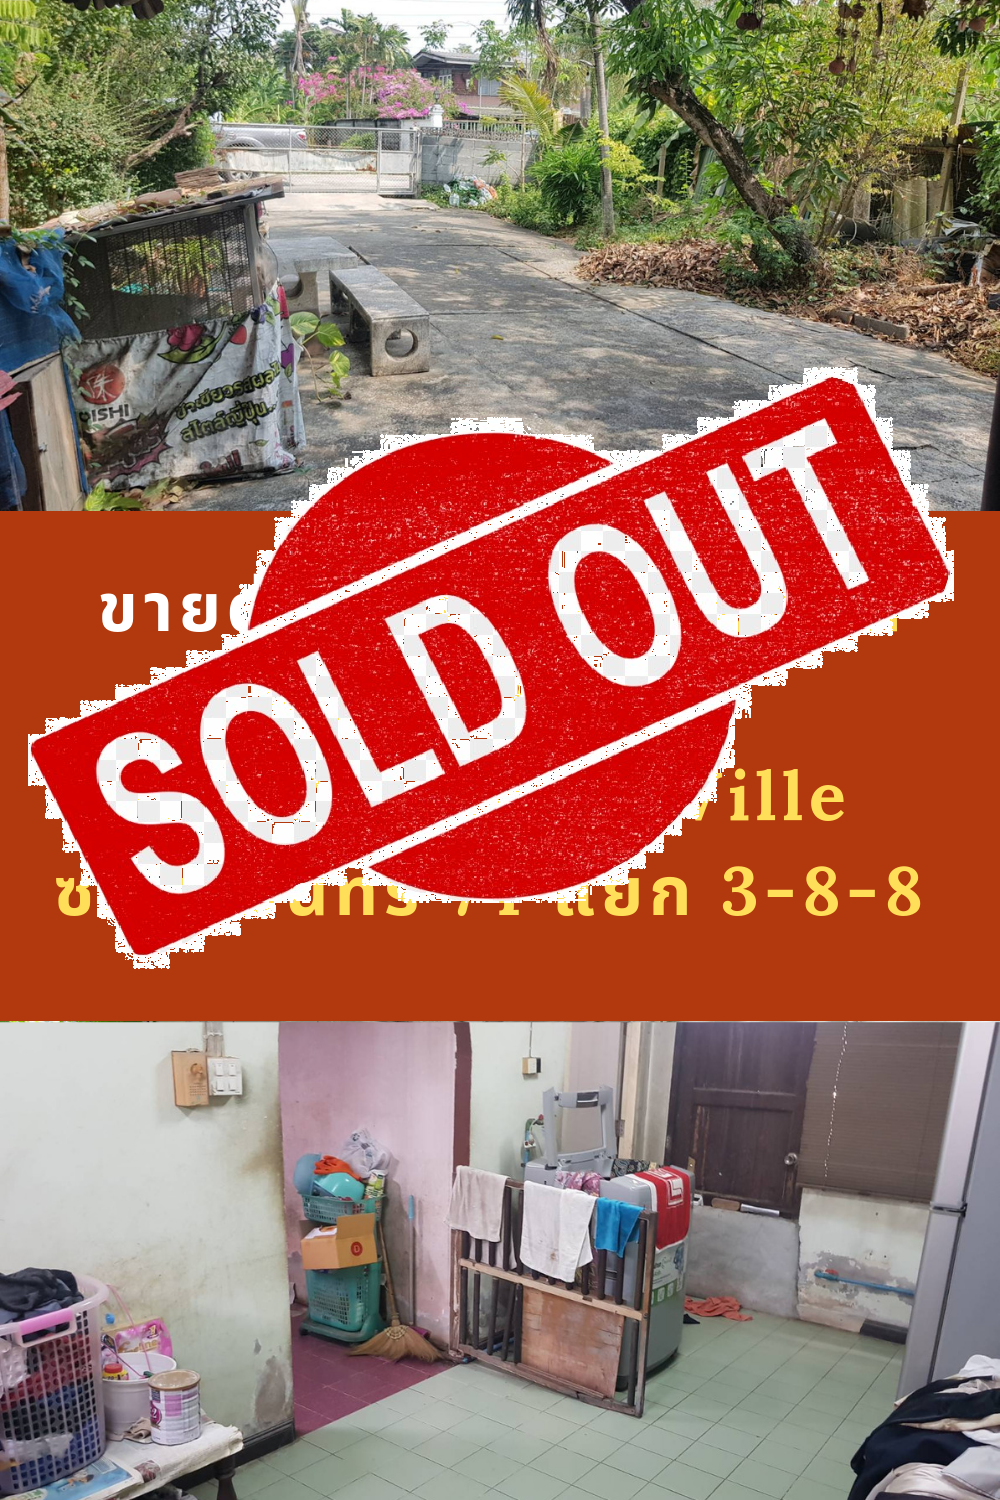 Sold Out House for sale in the size of 98 Sq. Near Chocolate Ville, Soi Nawamin 74